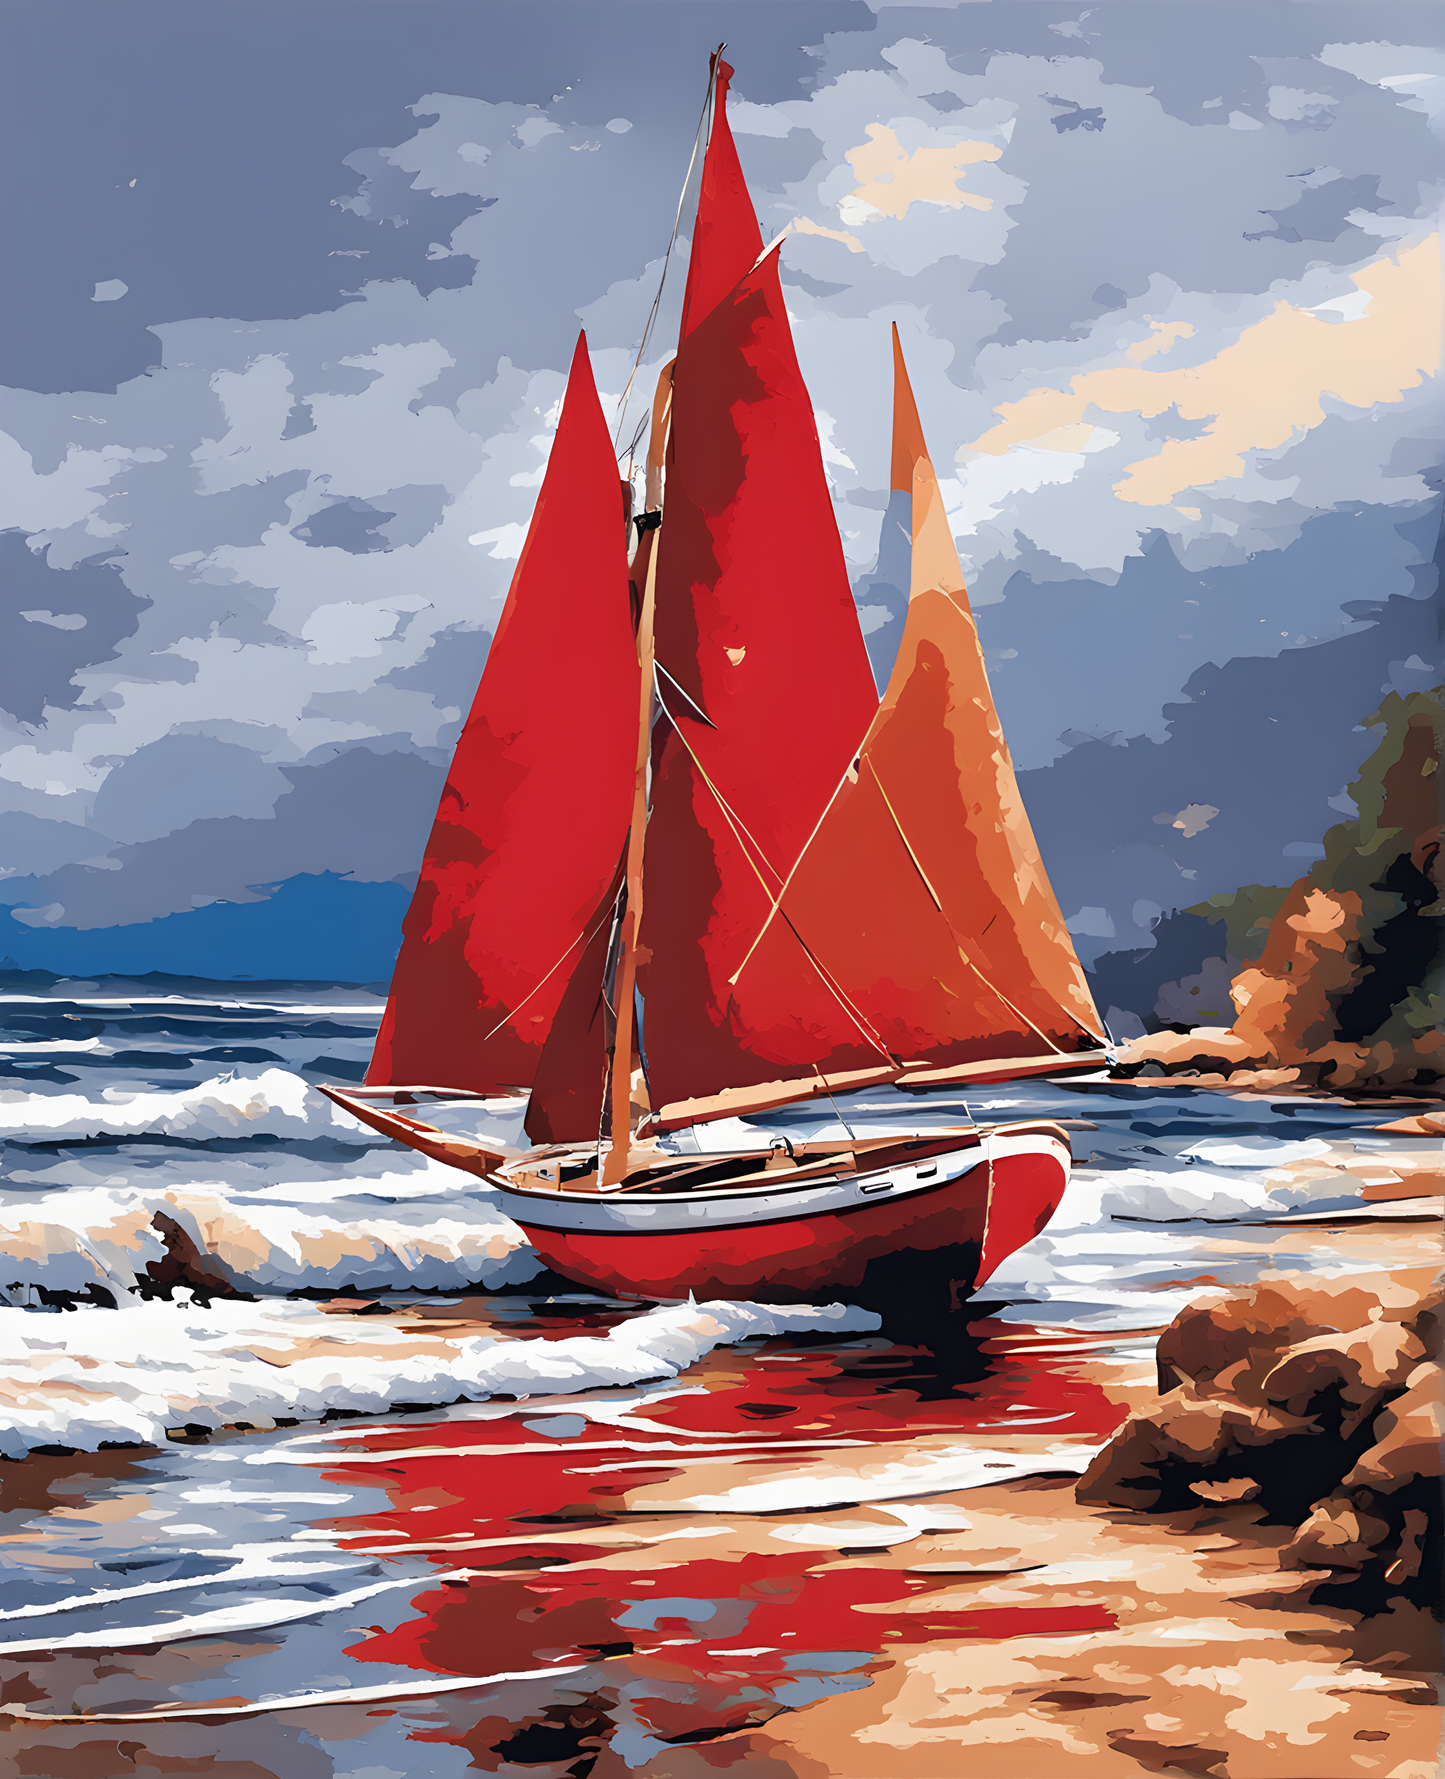 Red Sails Sailboat by the Shore (3) - Van-Go Paint-By-Number Kit